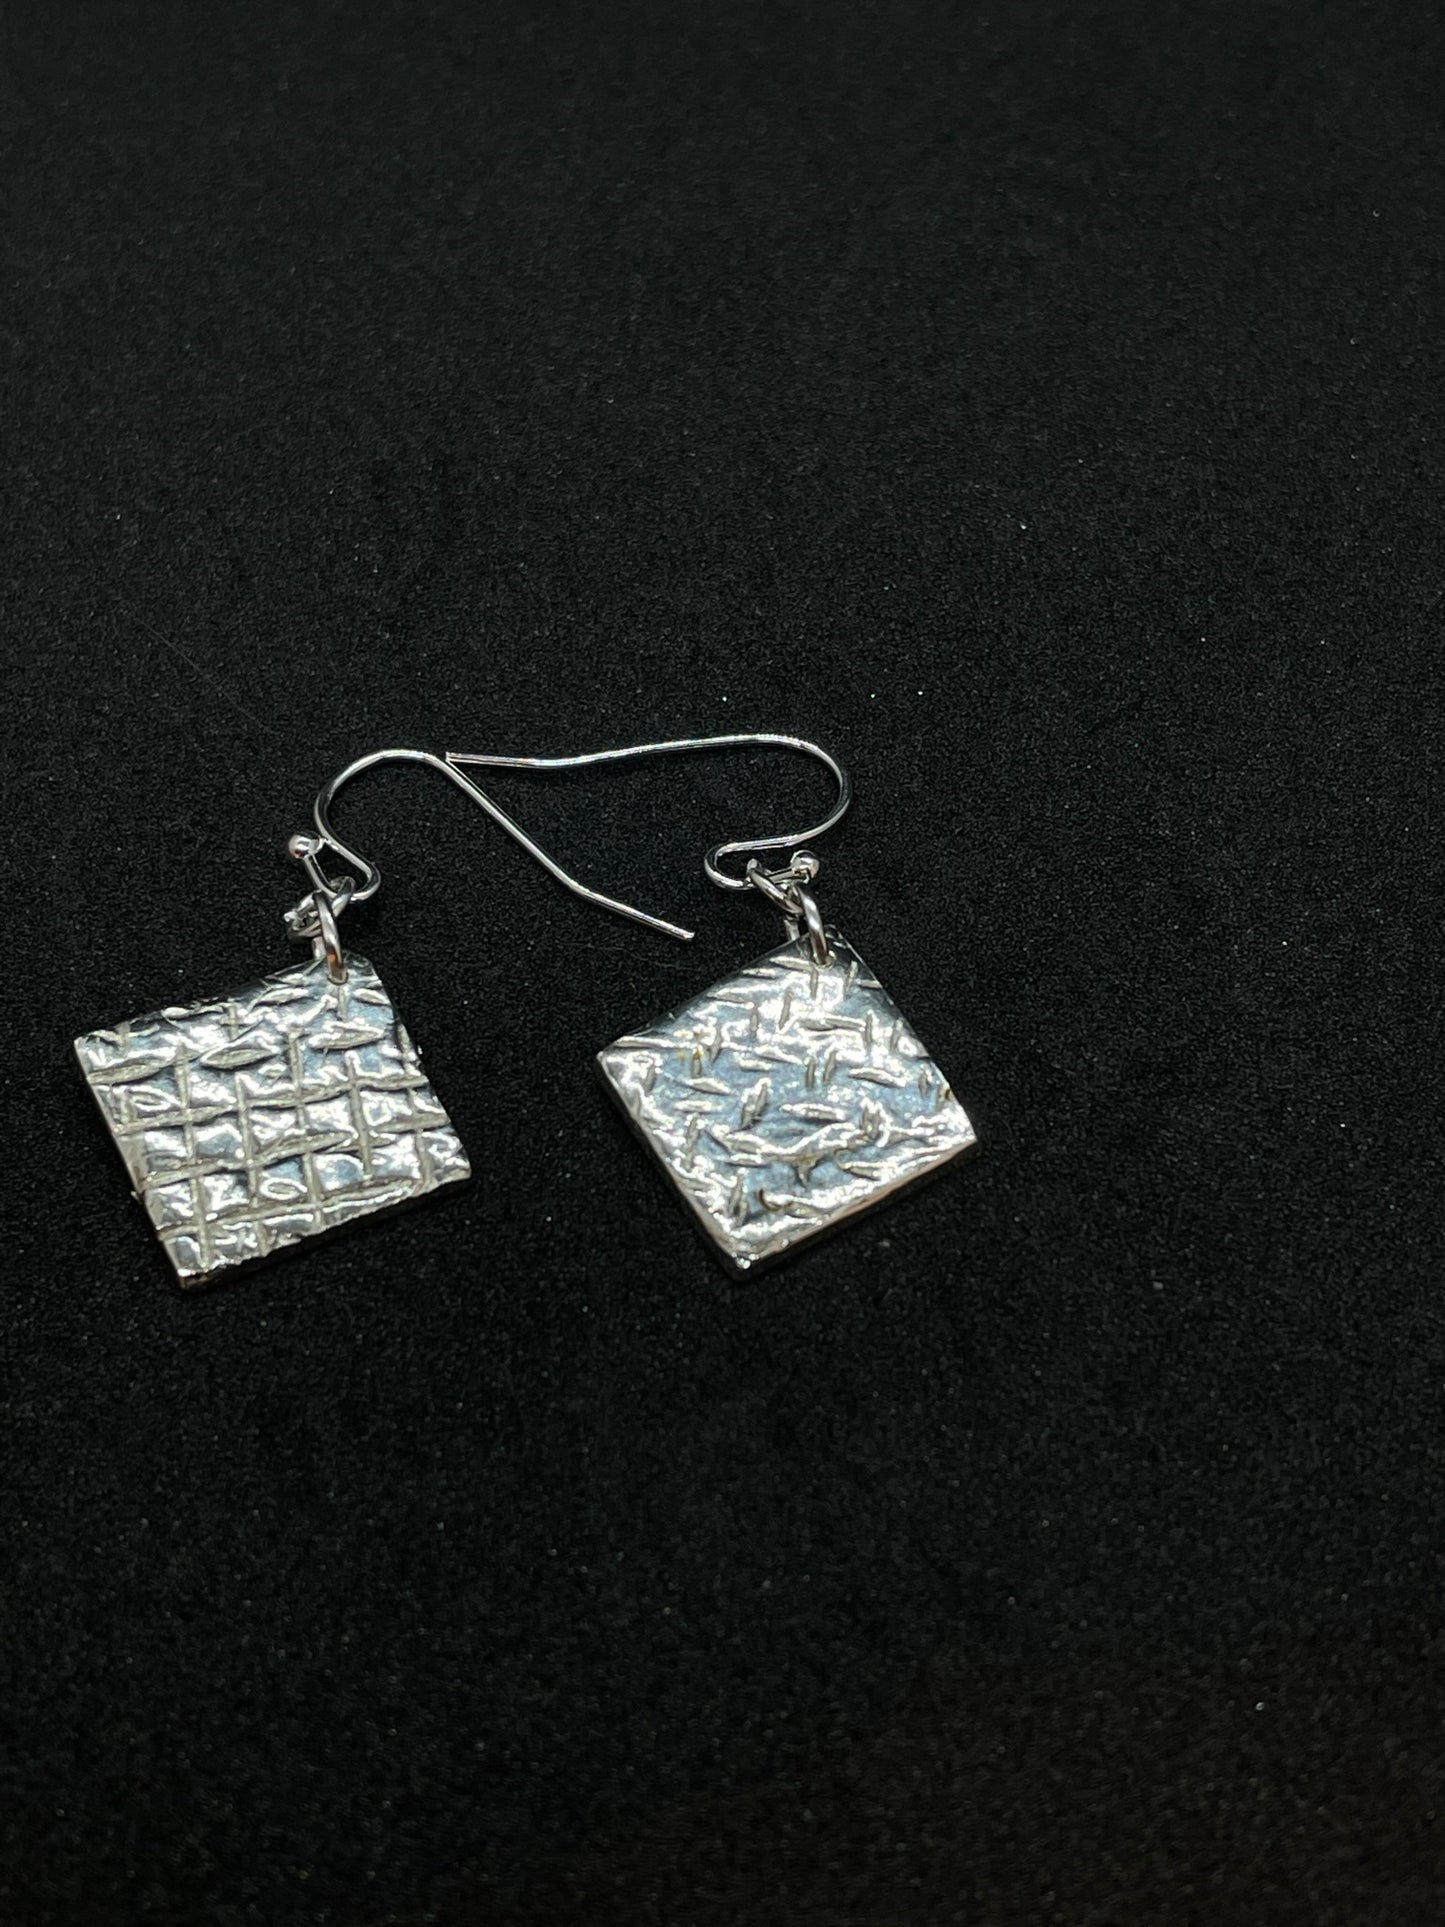 Silver rhombus earrings with square patterns